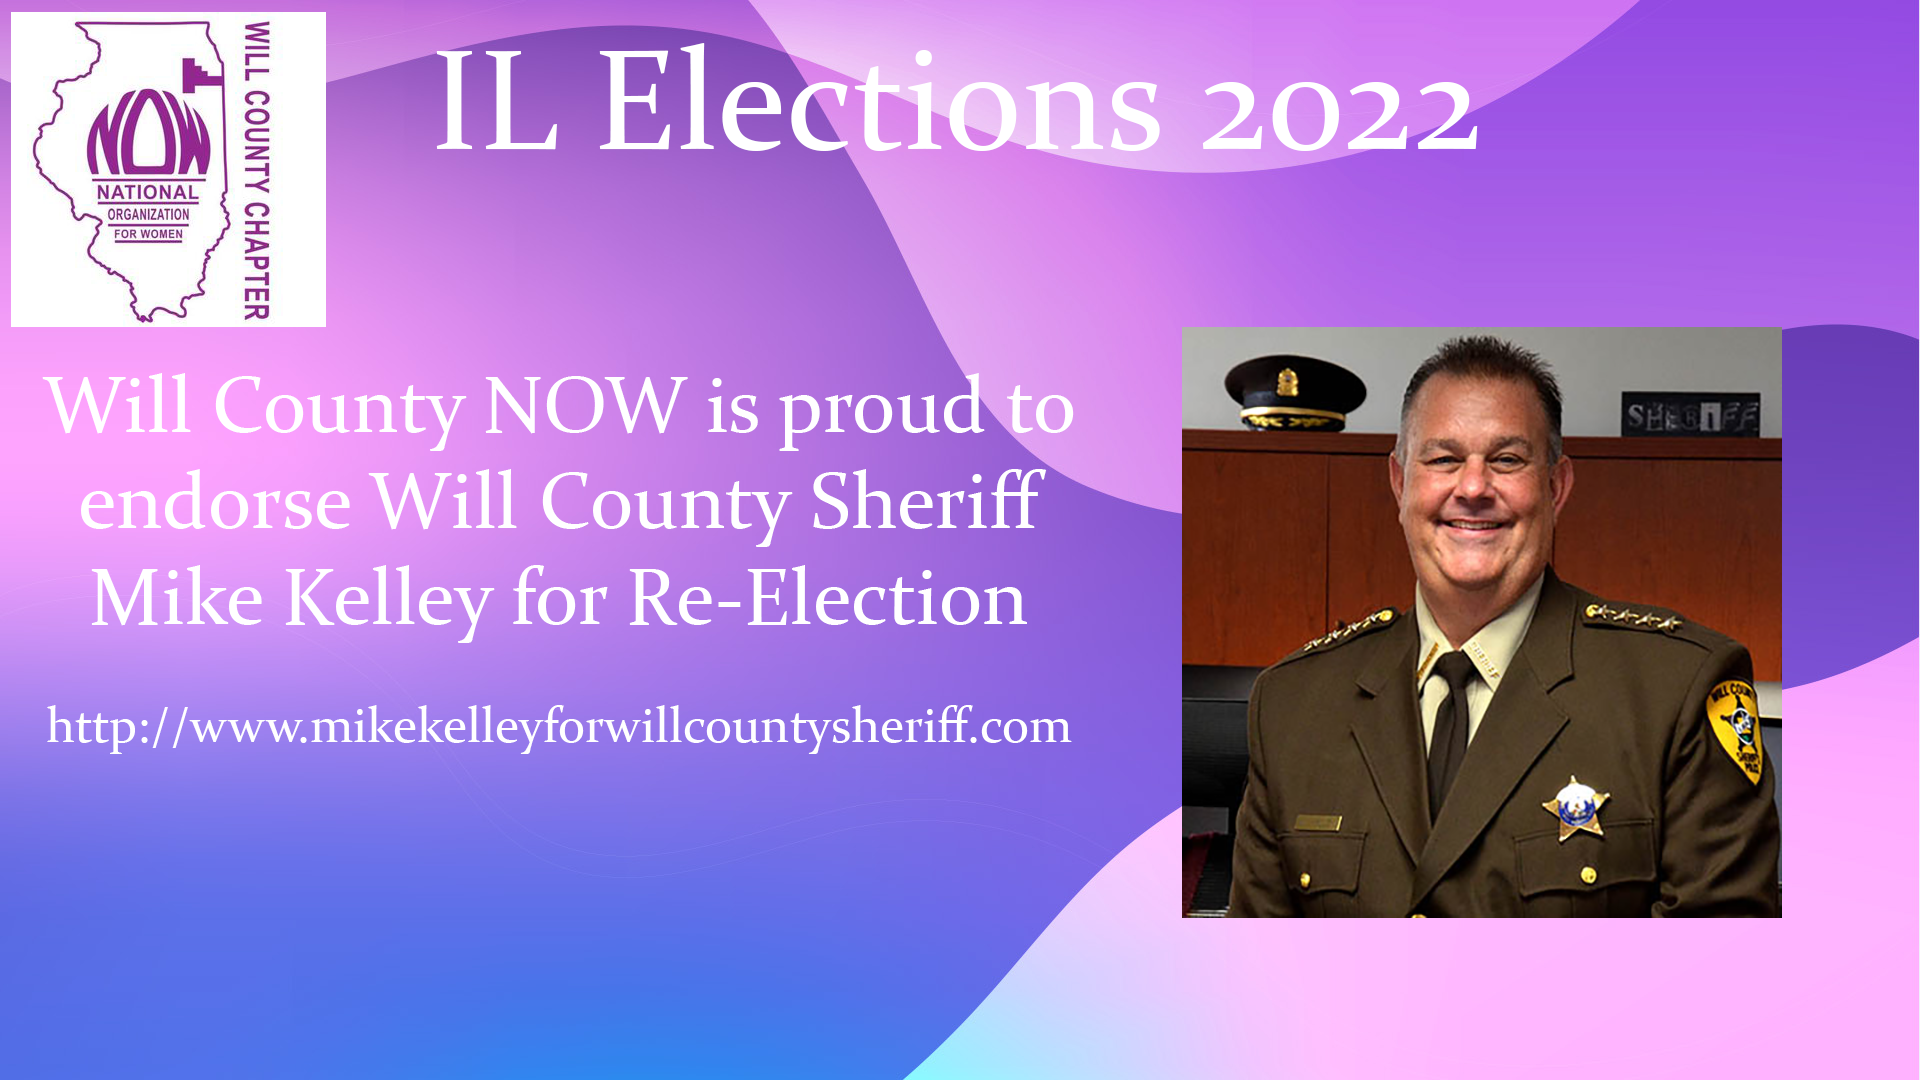 Will County NOW Endorses Will County Sheriff Mike Kelley for Re-Election